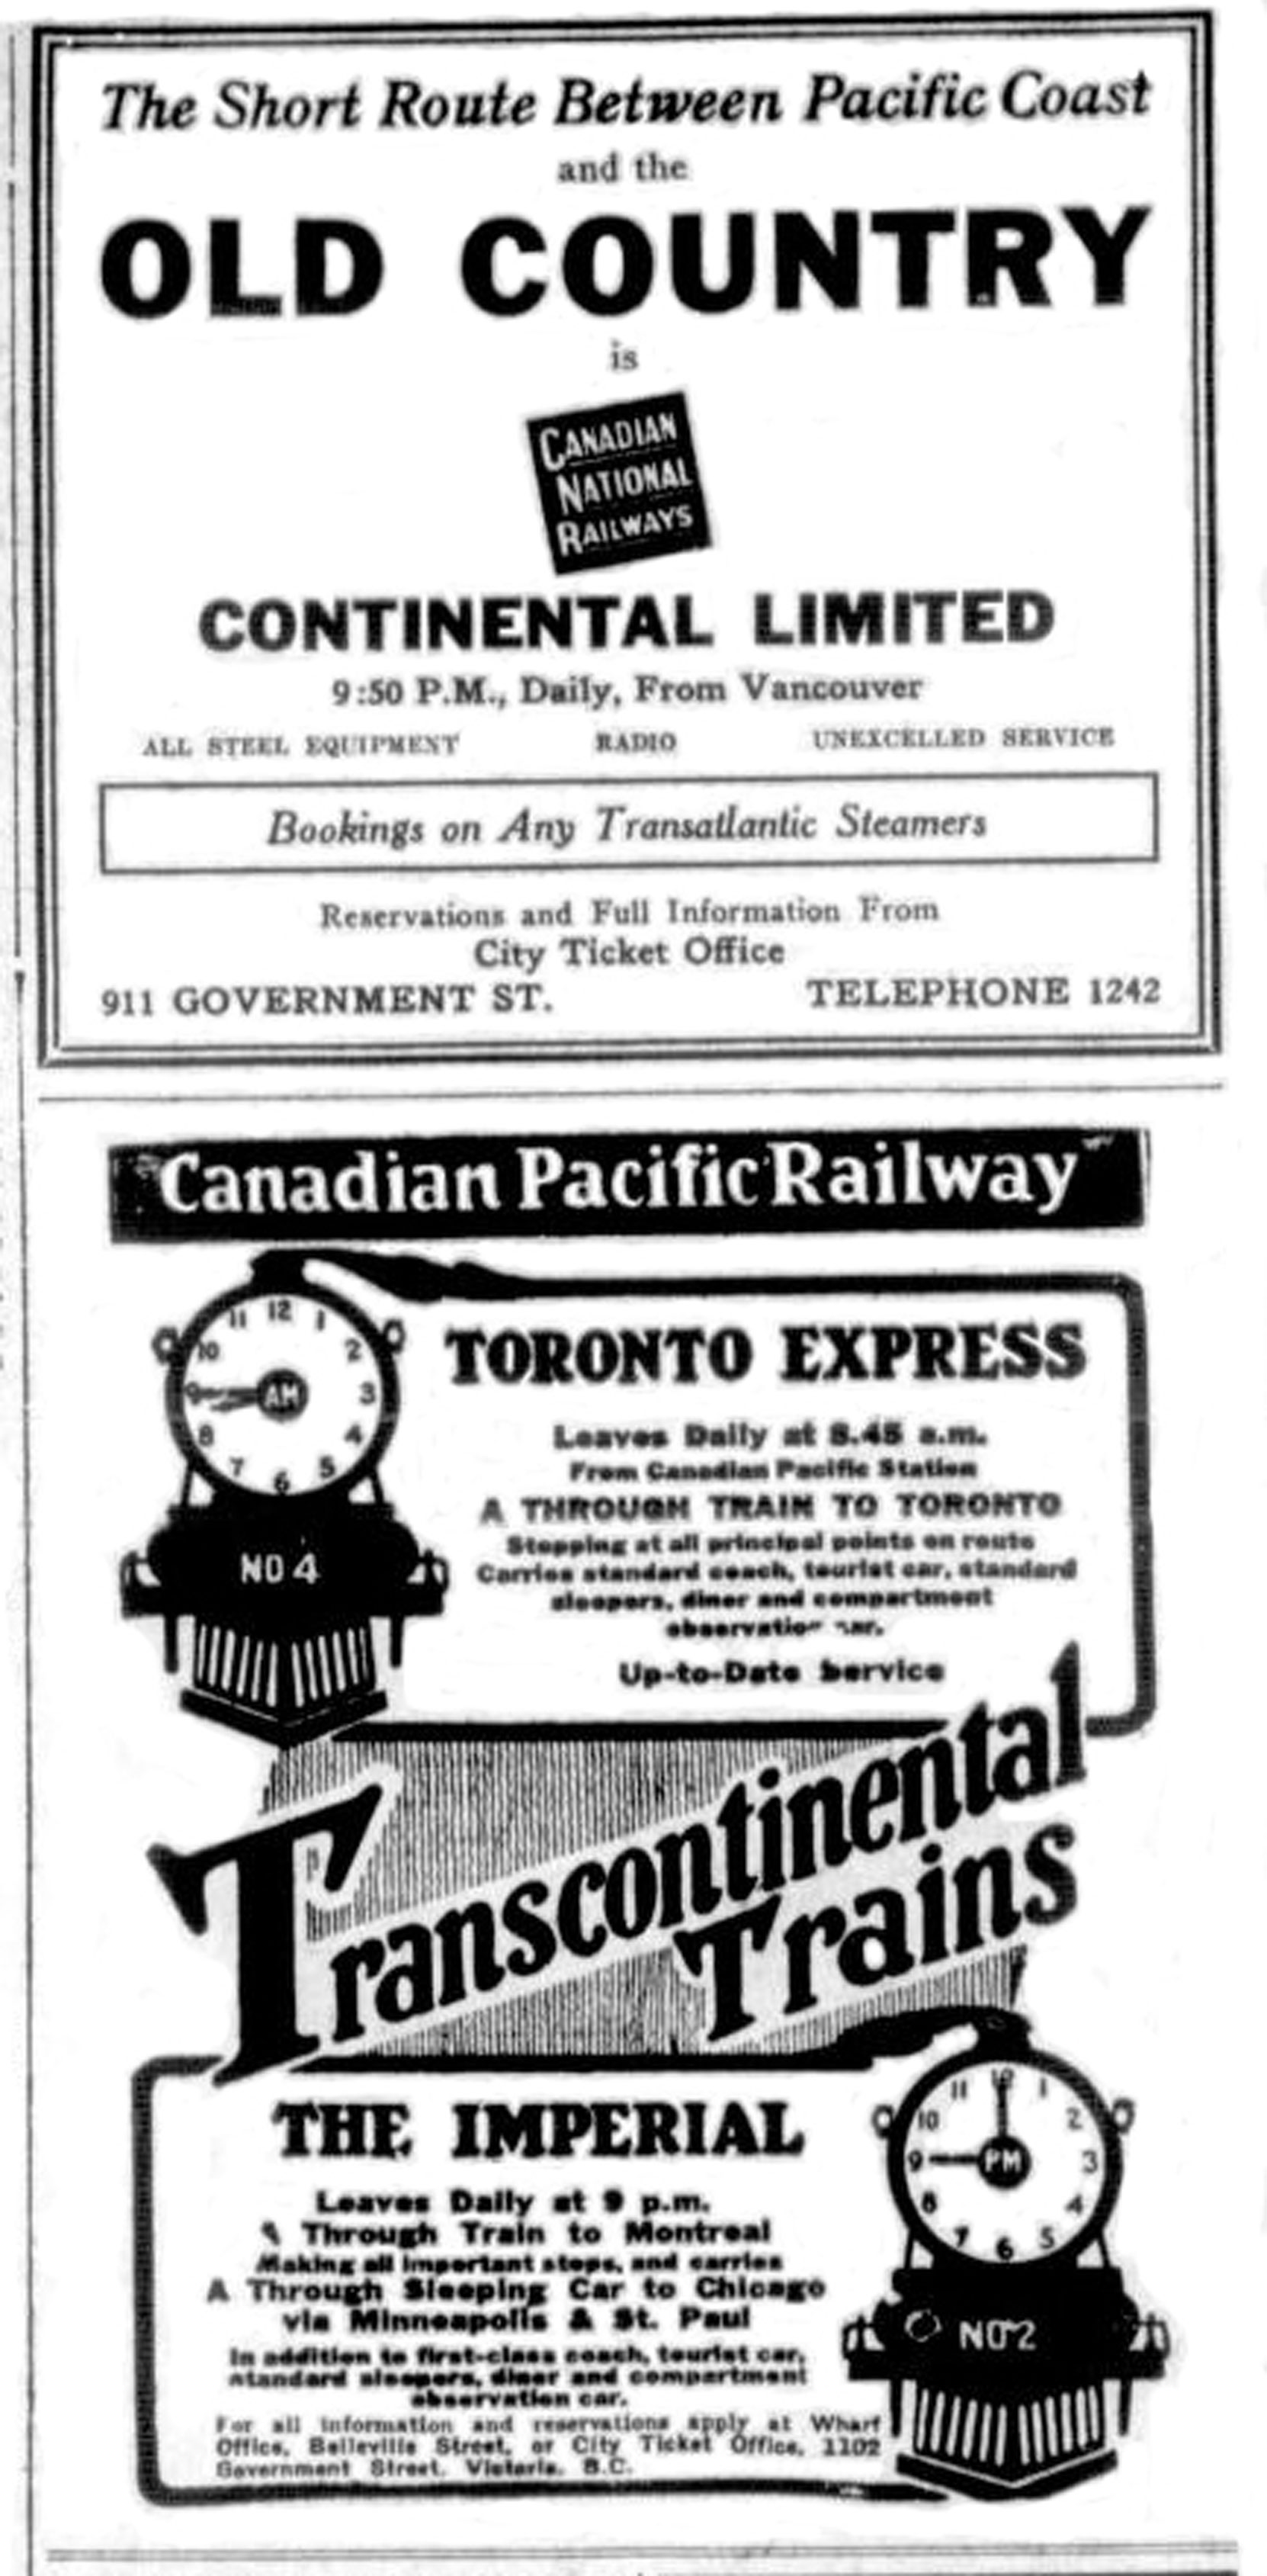 1925 advertisements for the Canadian National Railway (top), ticket office 911 Government Street, and the Canadian Pacific Railway (bottom) and its Victoria ticket office at 1102 Government Street (Victoria Online Sightseeing Tours collection)